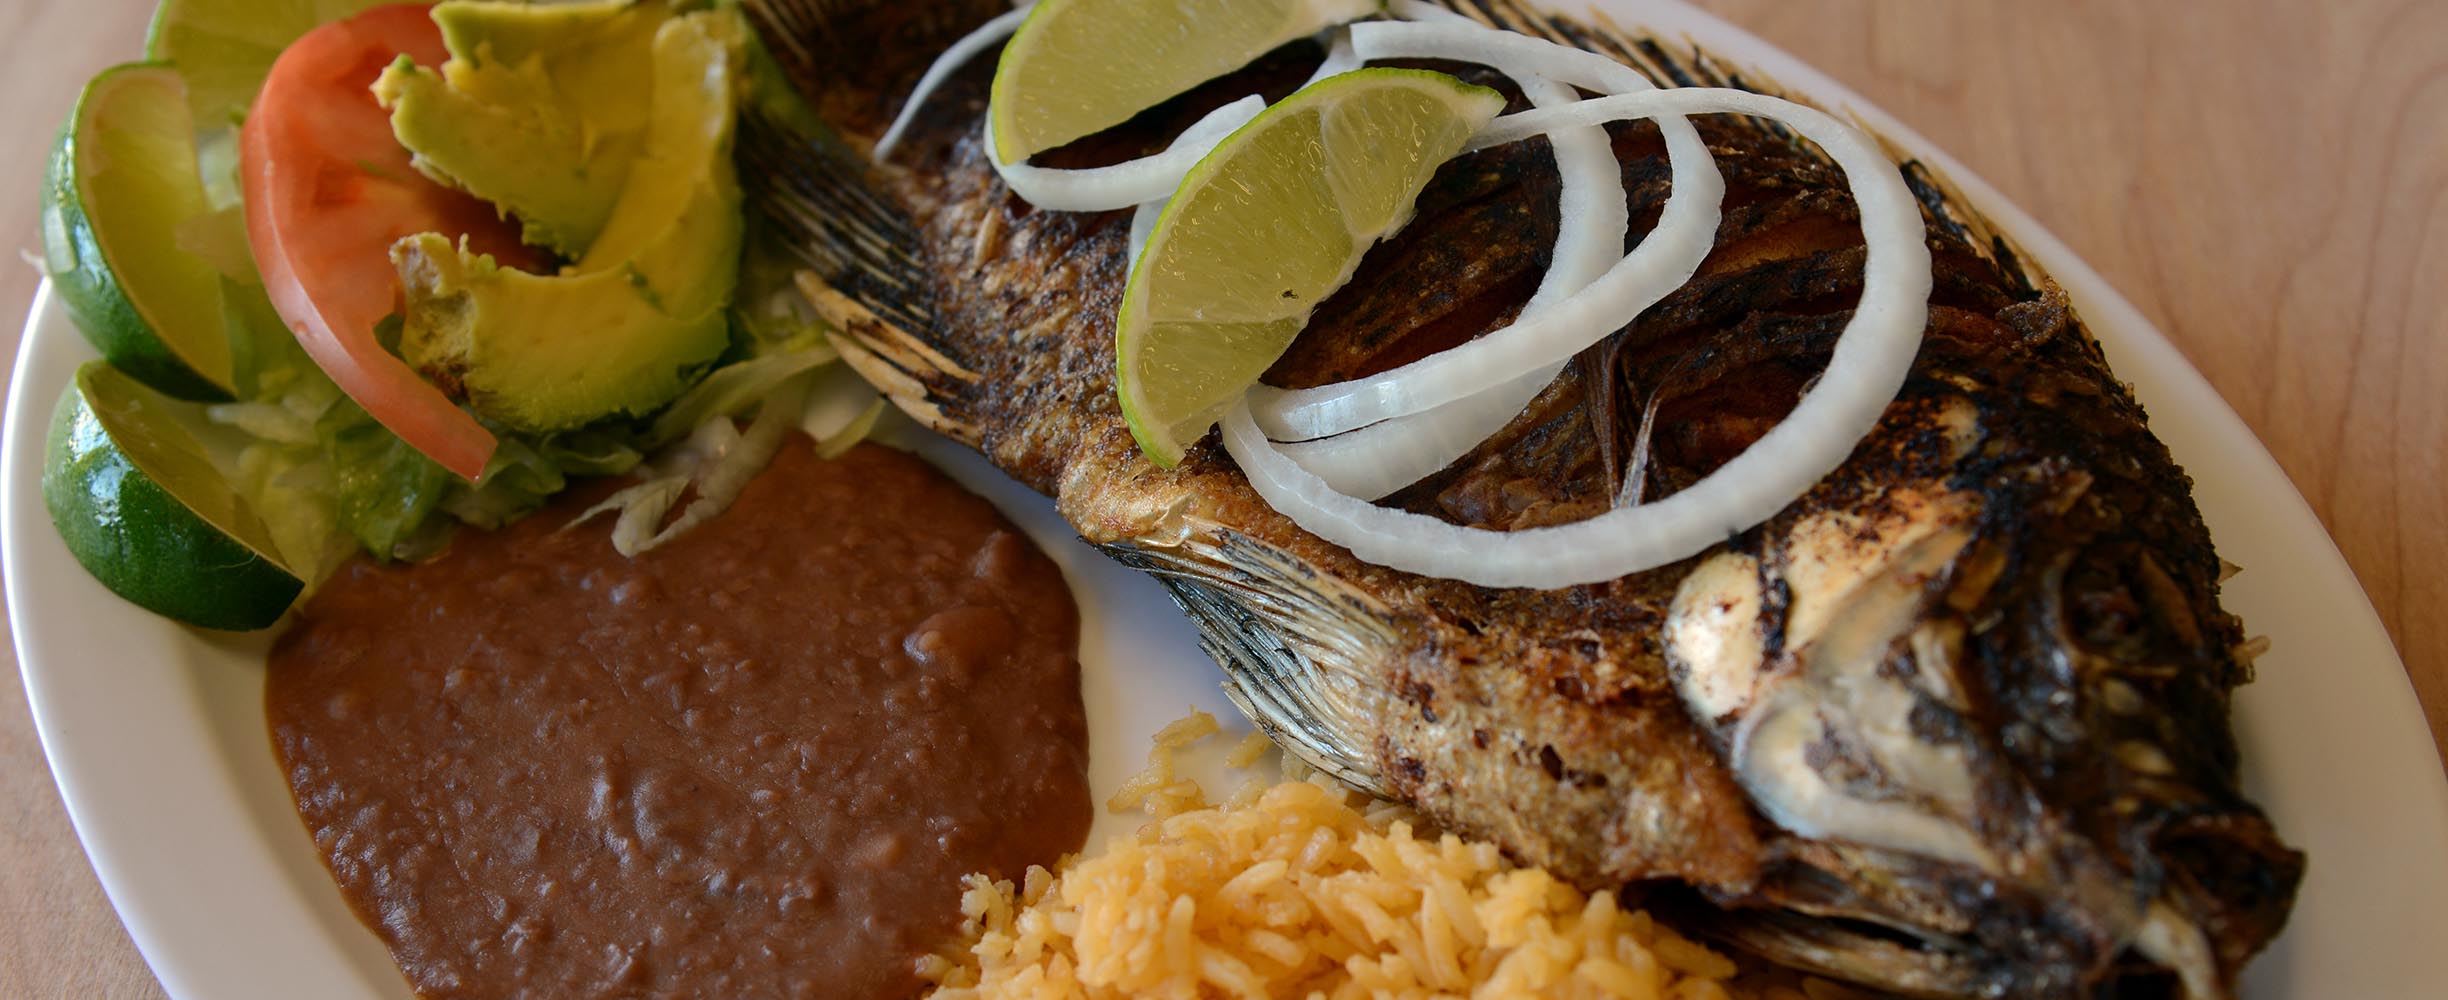 Fried whole fish, a typical Mexican and Salvadoran seafood dish using traditional recipes.